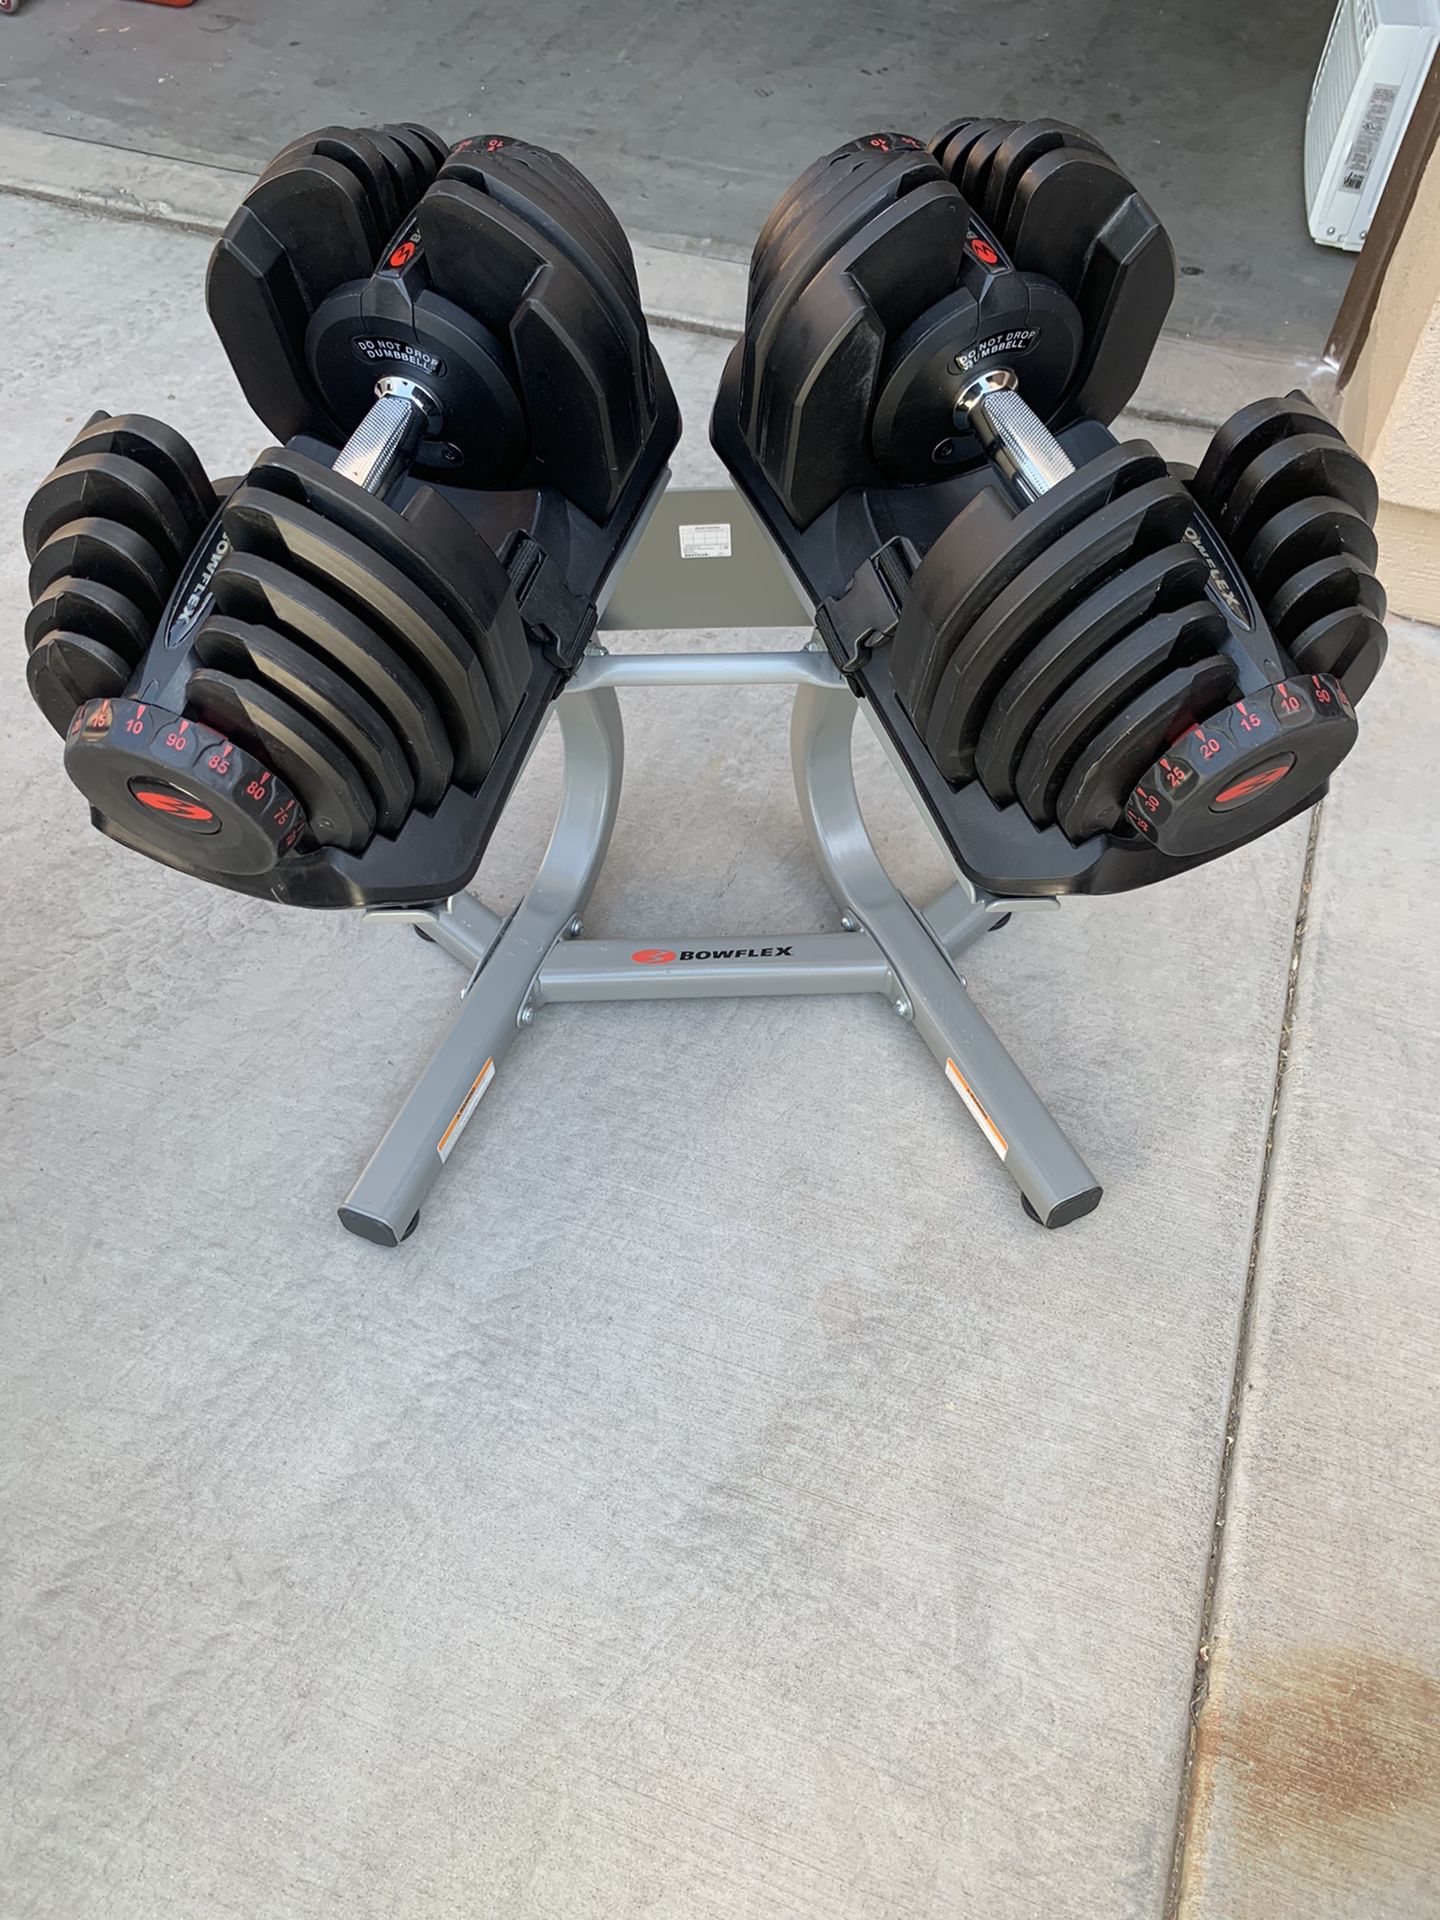 Boflex 1090 Adjustable Dumbbells (set of 2) with Stand